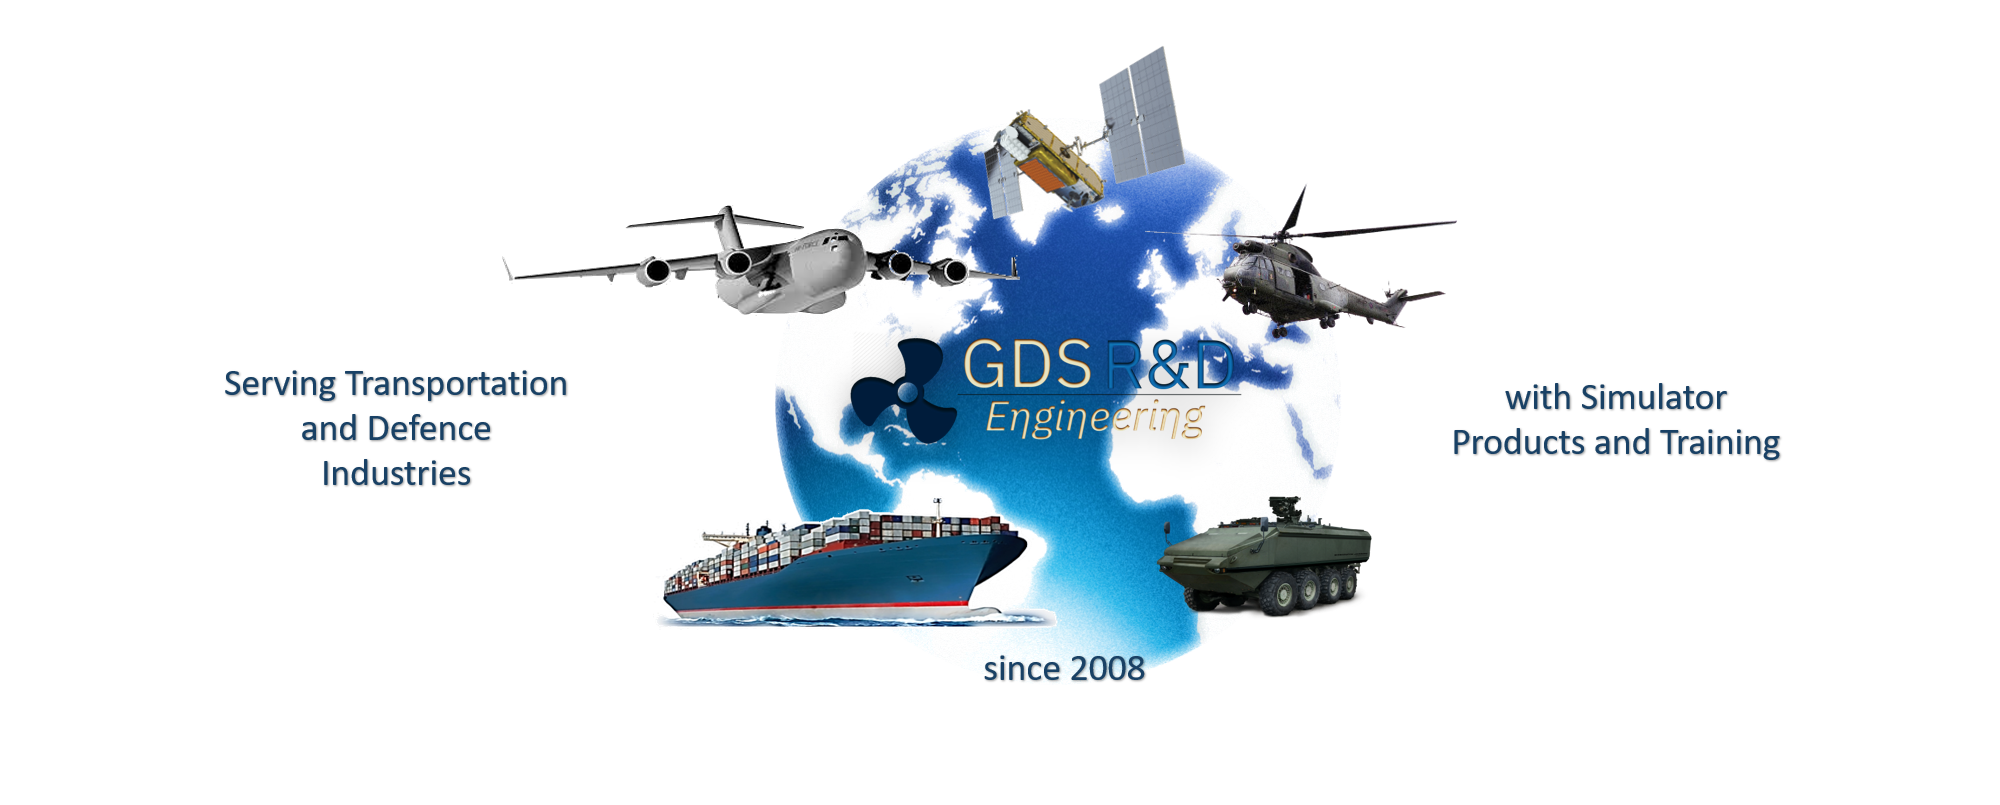 Global Dynamic Systems. GDS Systems Engineering Training Programs. Simulators. Engine Room Simulator (ERS). Ship. Electrical Systems Simulator. Physics Lab. UH60. Amphibious. Ground Vehicles. Military Training Programs. MIL-STD-810H Online Training. Environmental Testing of Military Products. Training helps reduce your design and operational risks. We provide MIL-STD-810H, RTCA-DO-160, Vibration and Shock, FAA Requirements Management courses. by Dr Ismail Cicek and a CVE certified by EASA. Ship Engine Room Simulator (ERS) SERS GDS Engineering R&amp;D IMO STCW 2010, Engine Performance, Main Diesel Engine, Marine, Maritime, IMO Model Course 2.07. Certified by Class NK. ITU Maritime Faculty. Yıldız Technical University. Competencies. Operation and Management Level. Education and Training. Assessment of Marine Engineers. Troubleshooting with Fault Tree Scnearious and Analysis Reporting. Maritime. Marine Engineering. San Antonio, Texas, Dayton, OH. WPAFB.